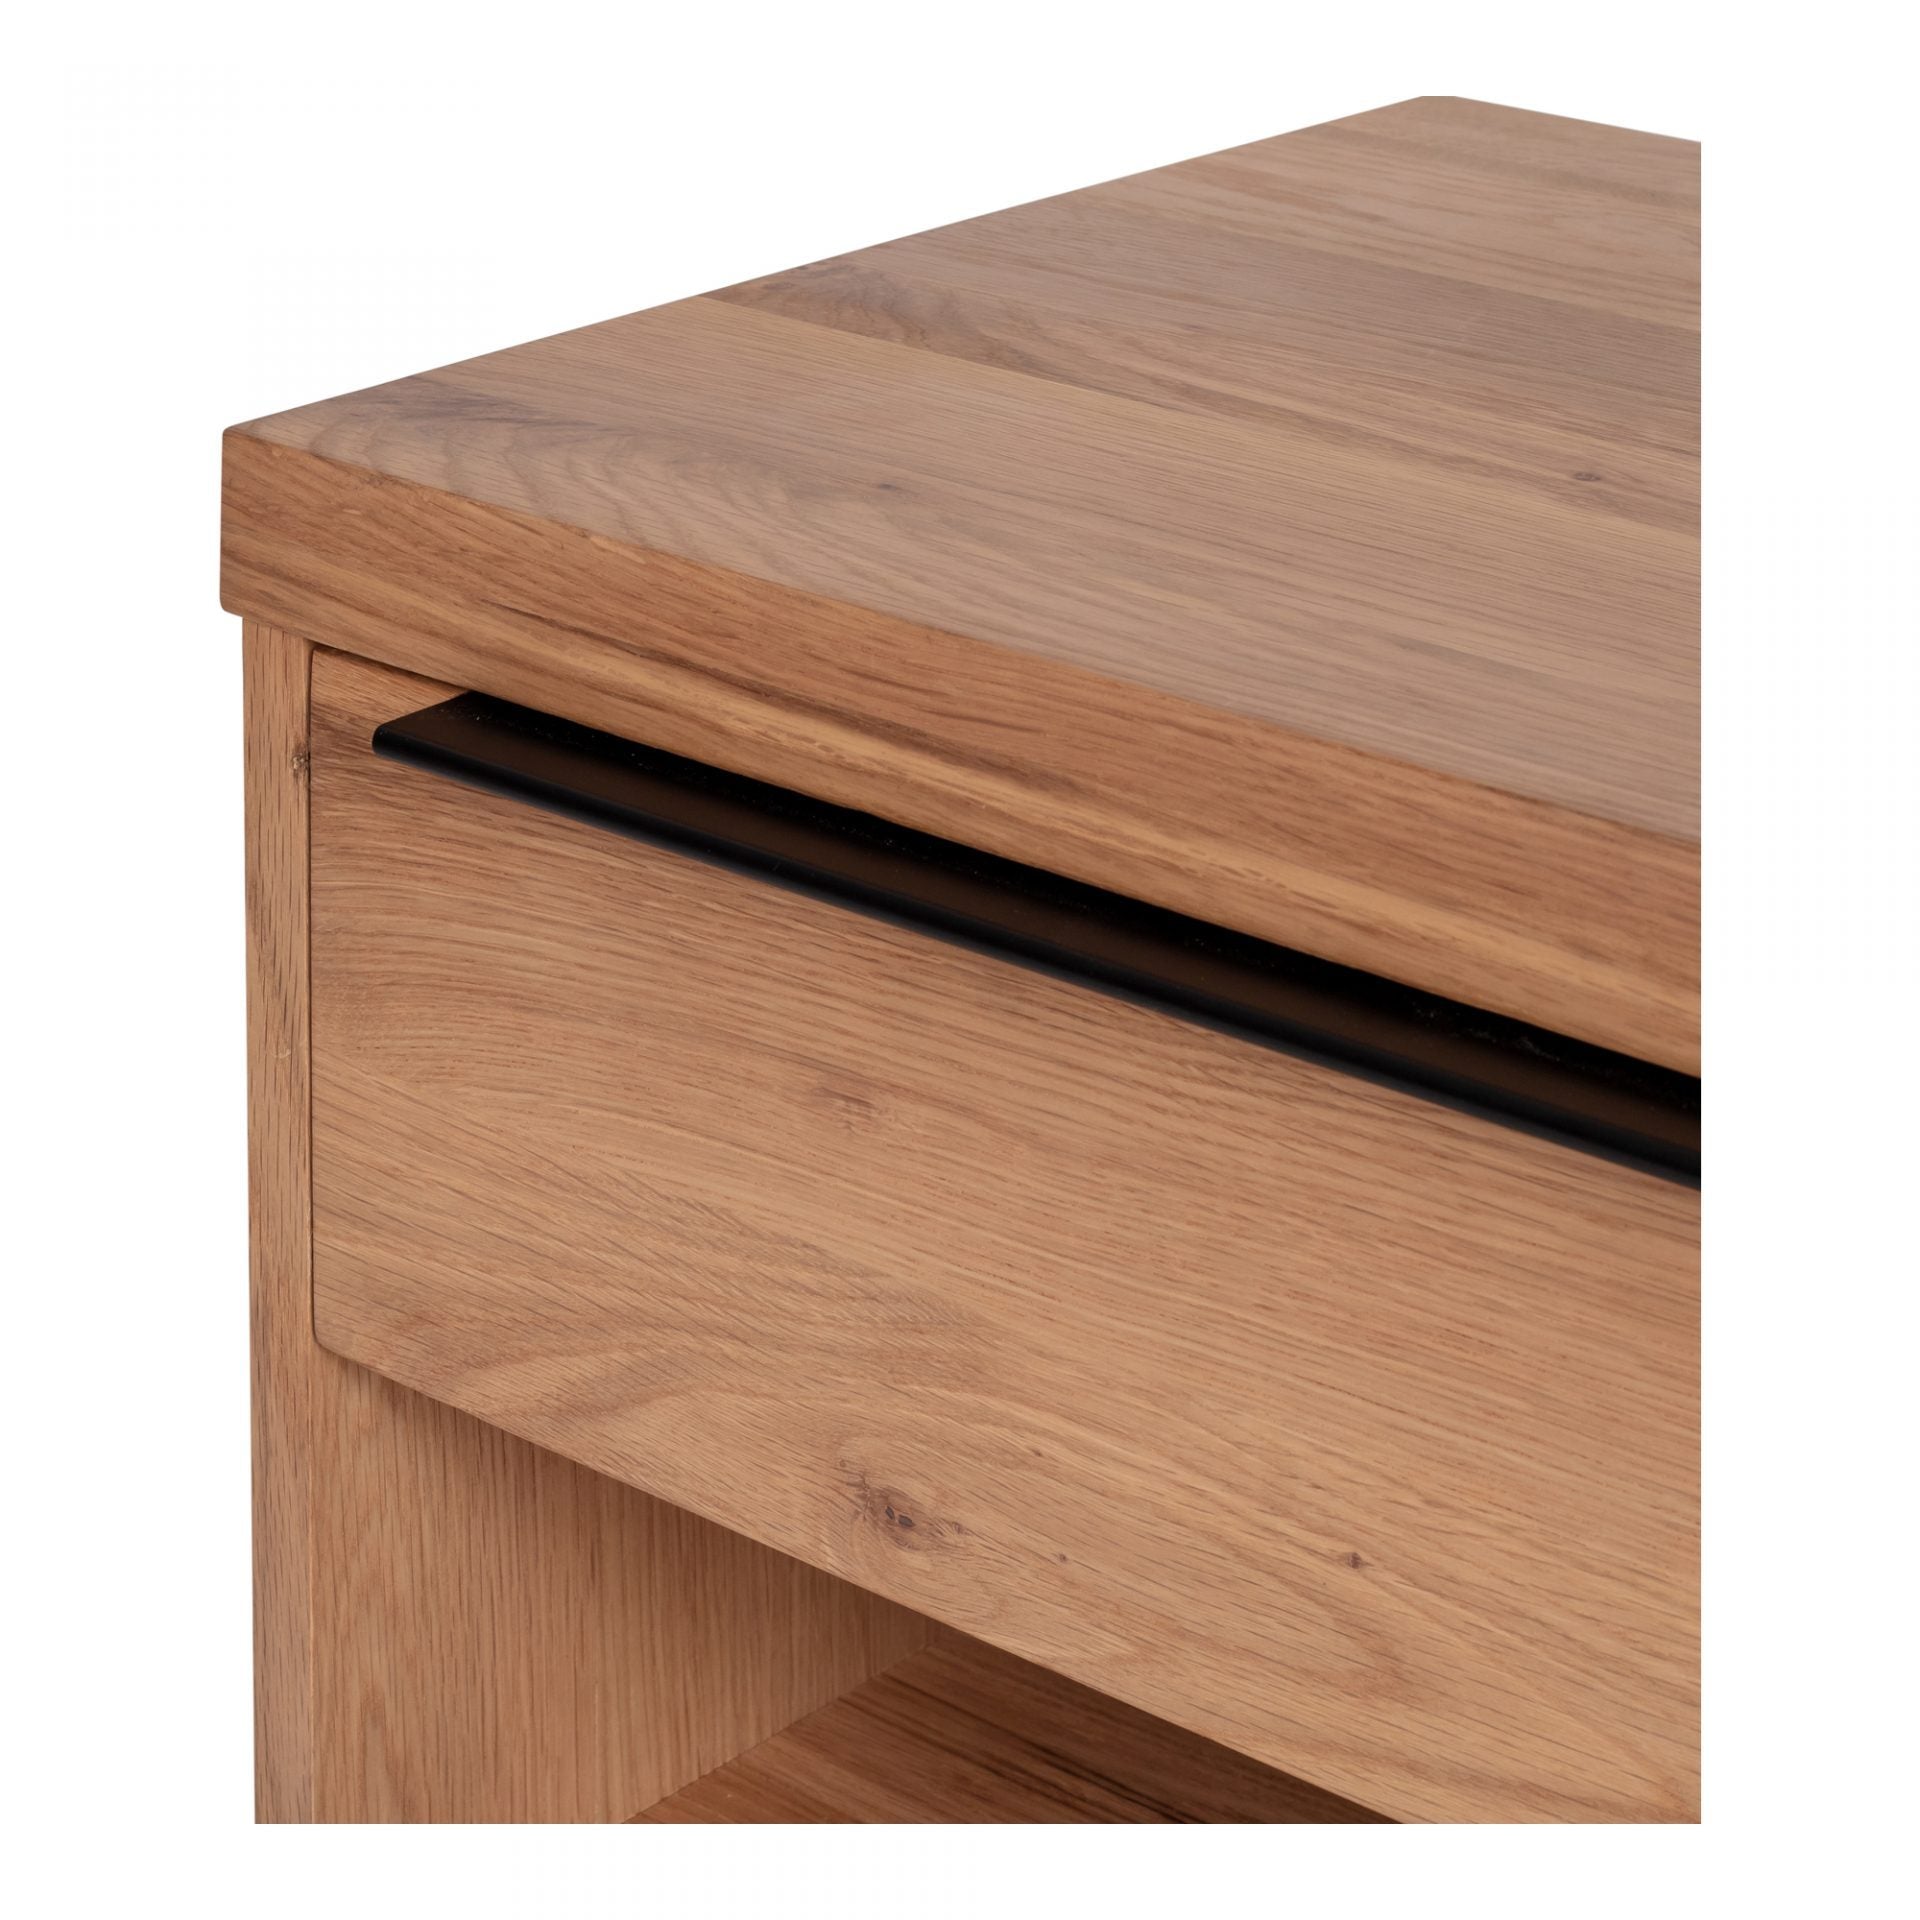 Montego One-Drawer Nightstand: Sleek Storage by Your Bedside